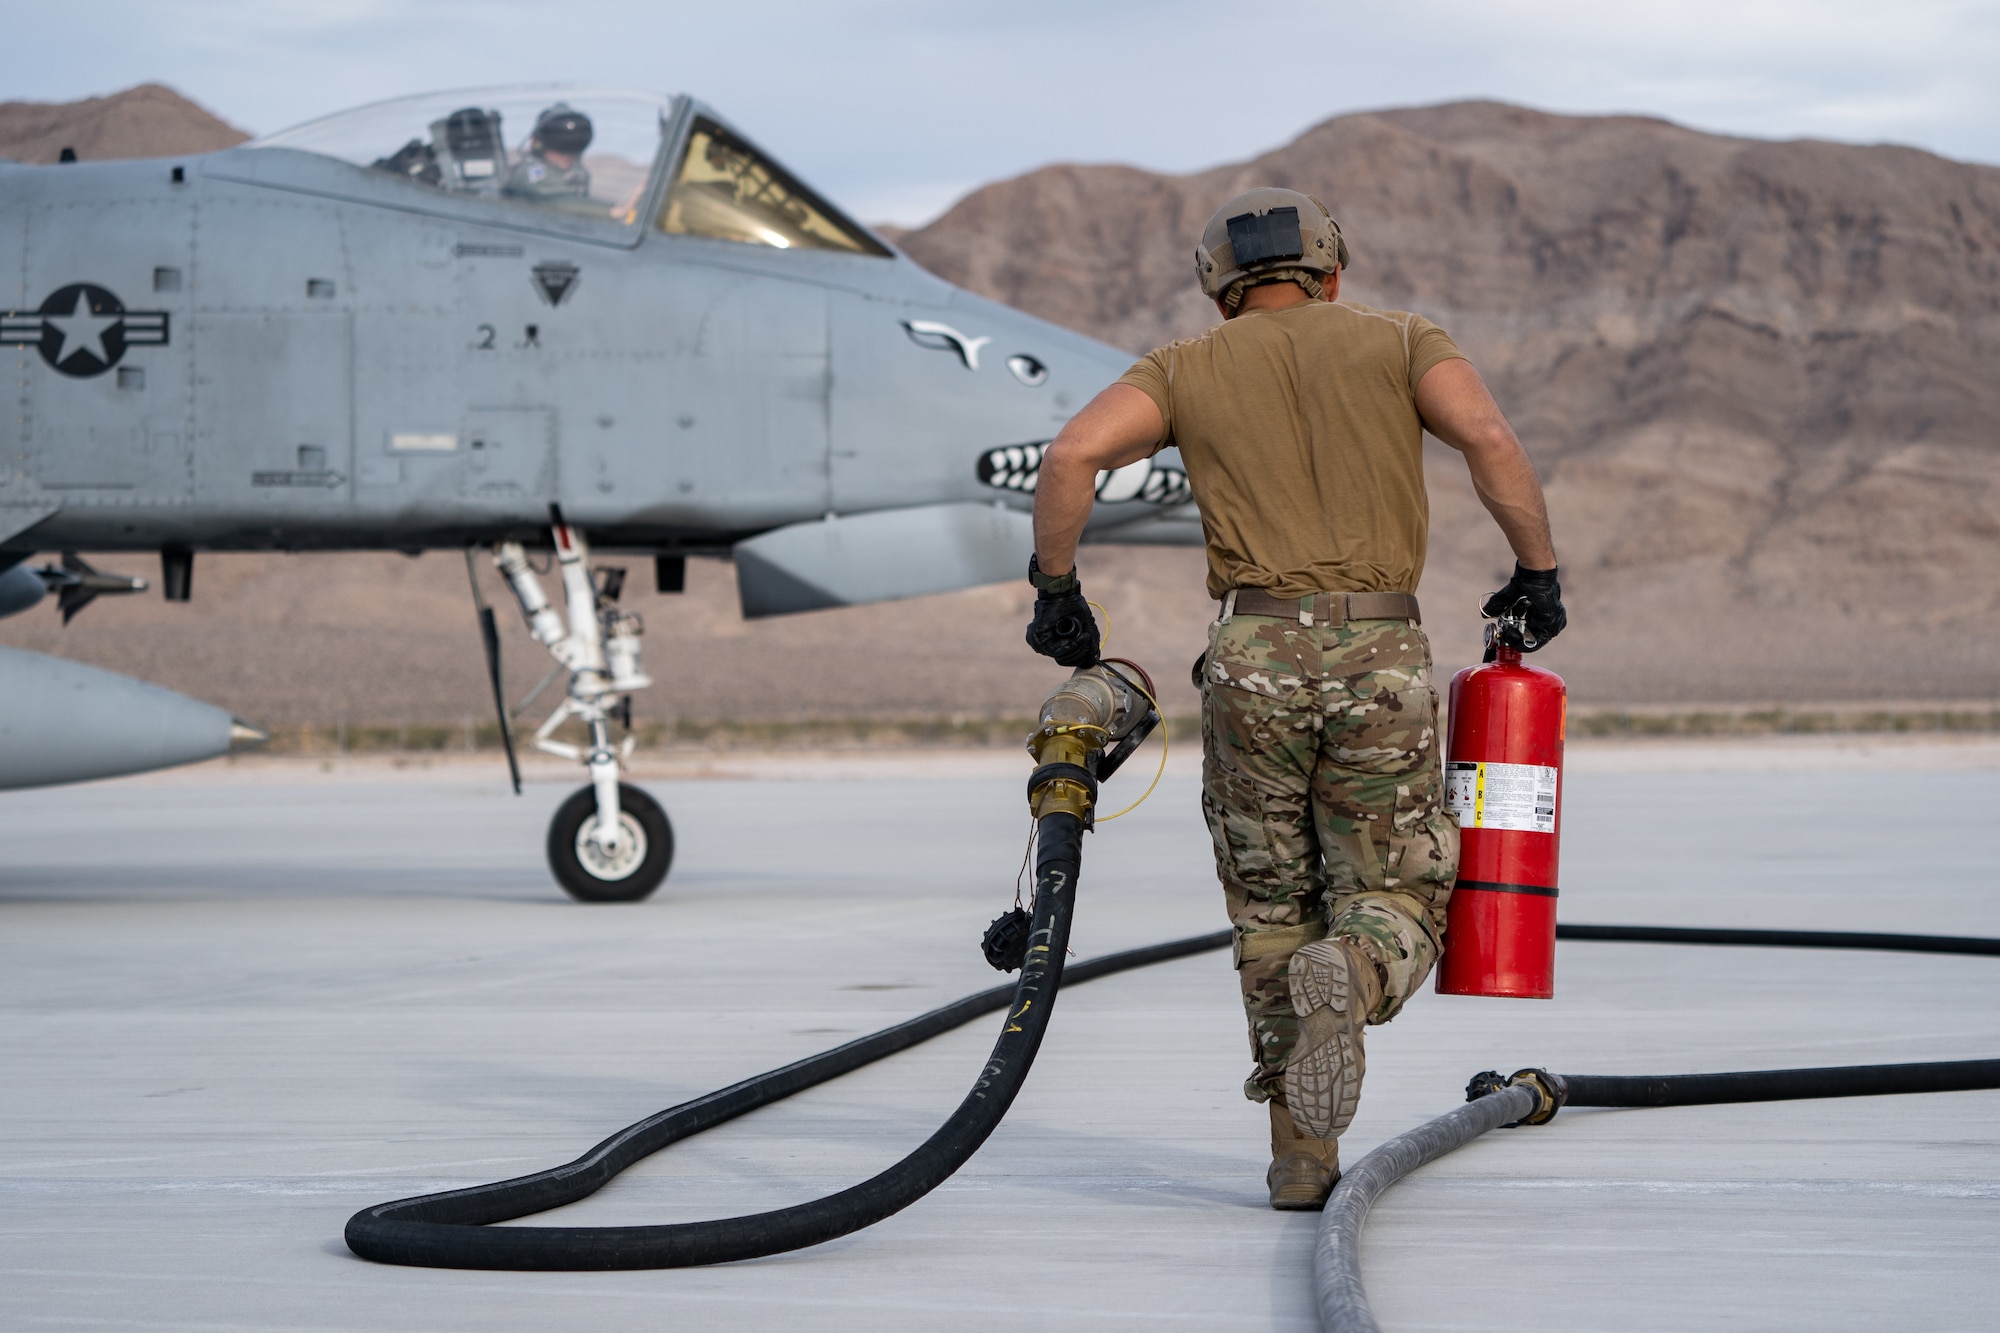 Staff Sgt Fermin Garcia, 355th Logistics Readiness Squadron Forward Area Refueling Point (FARP) operator, Davis-Monthan Air Force Base, Arizona, runs to refuel an A-10 Thunderbolt II during Black Flag 22-1 at Nellis Air Force Base, Nevada, May 12, 2022. The A-10 Thunderbolt II is the first Air Force aircraft specially designed for close air support of ground forces. (U.S. Air Force photo by Airman 1st Class Josey Blades)